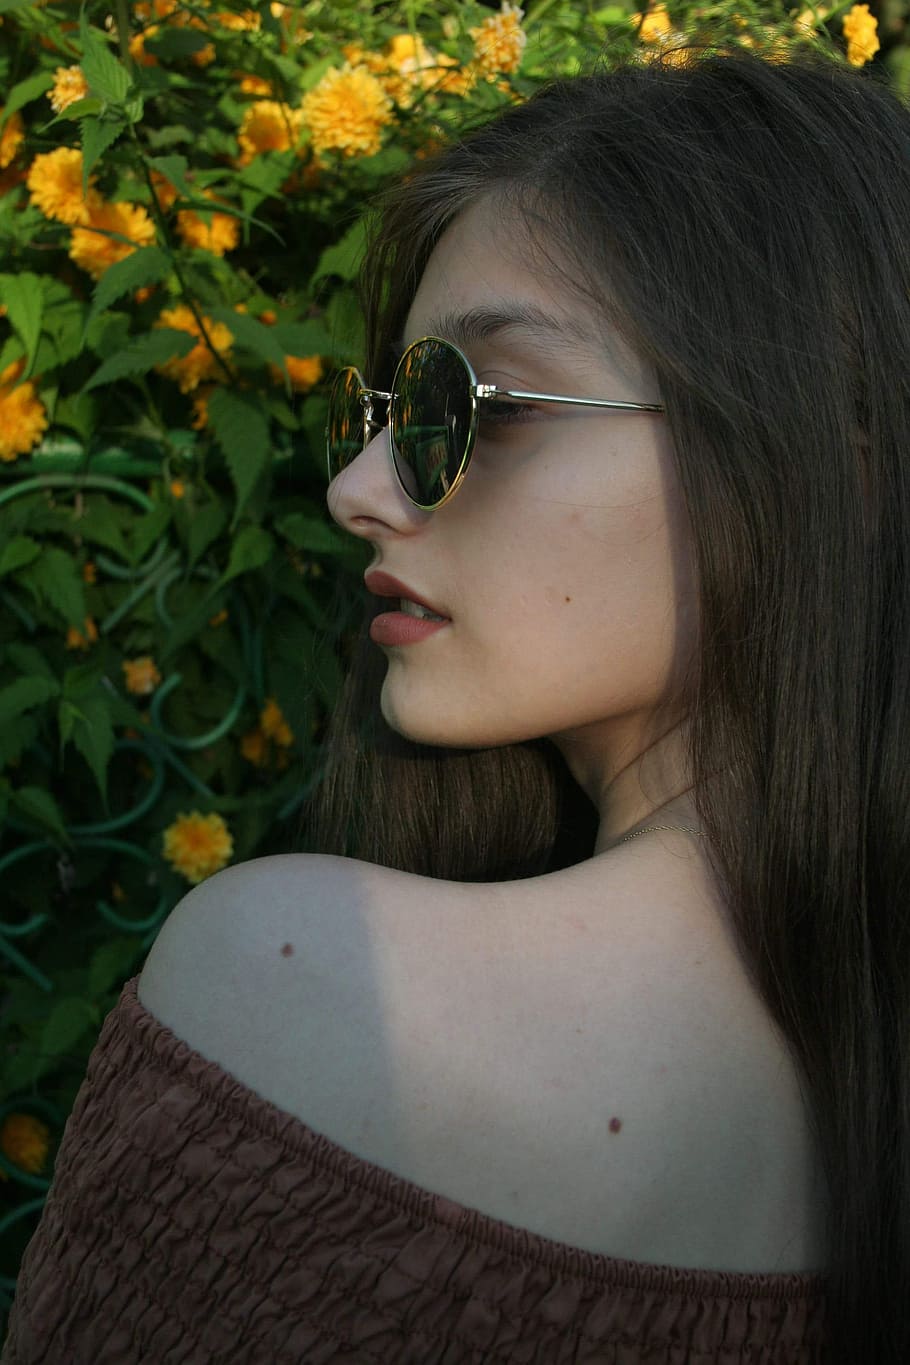 girl, sunset, glasses, seriousness, one person, young adult, young women, fashion, sunglasses, lifestyles